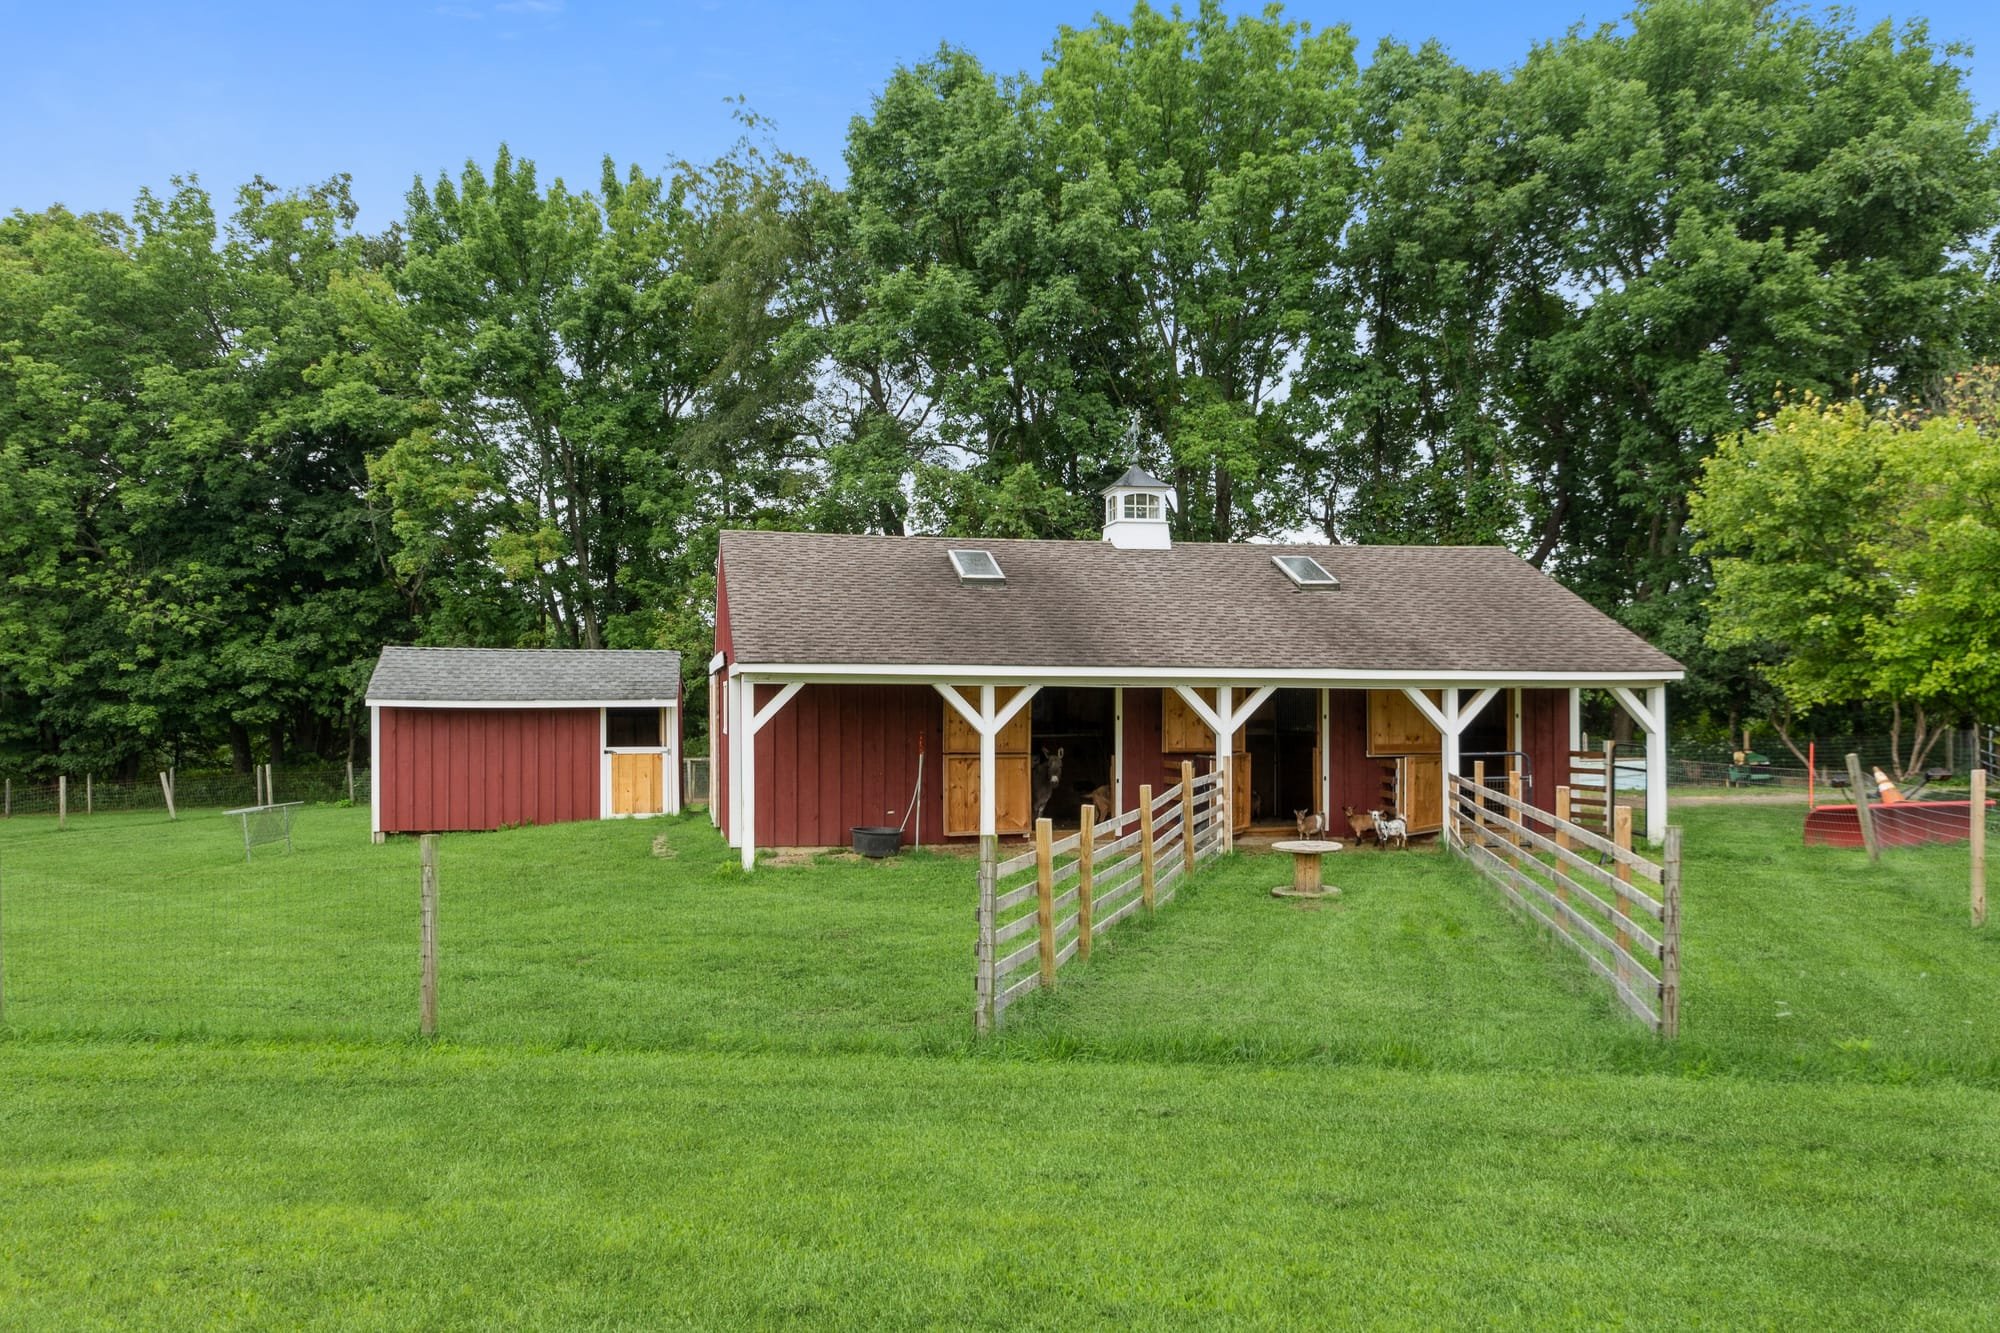 HORSE FARM-SOLD IN LONG VALLEY $775k